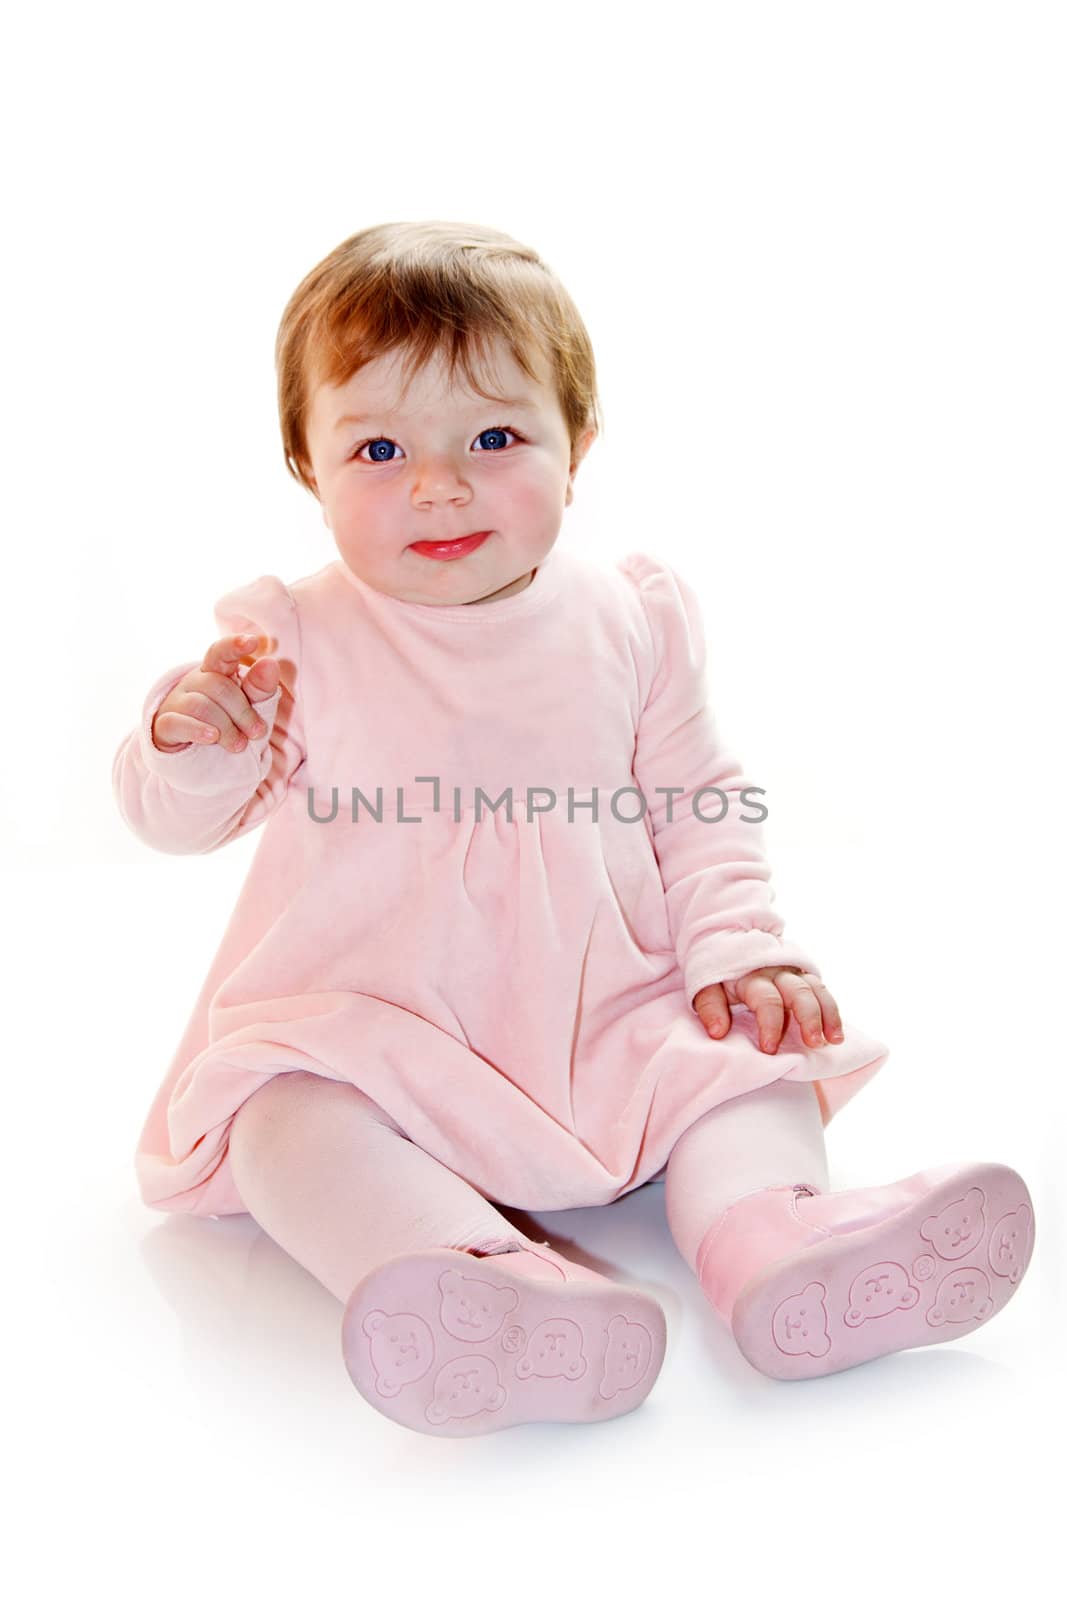 portrait of bautiful baby in pink